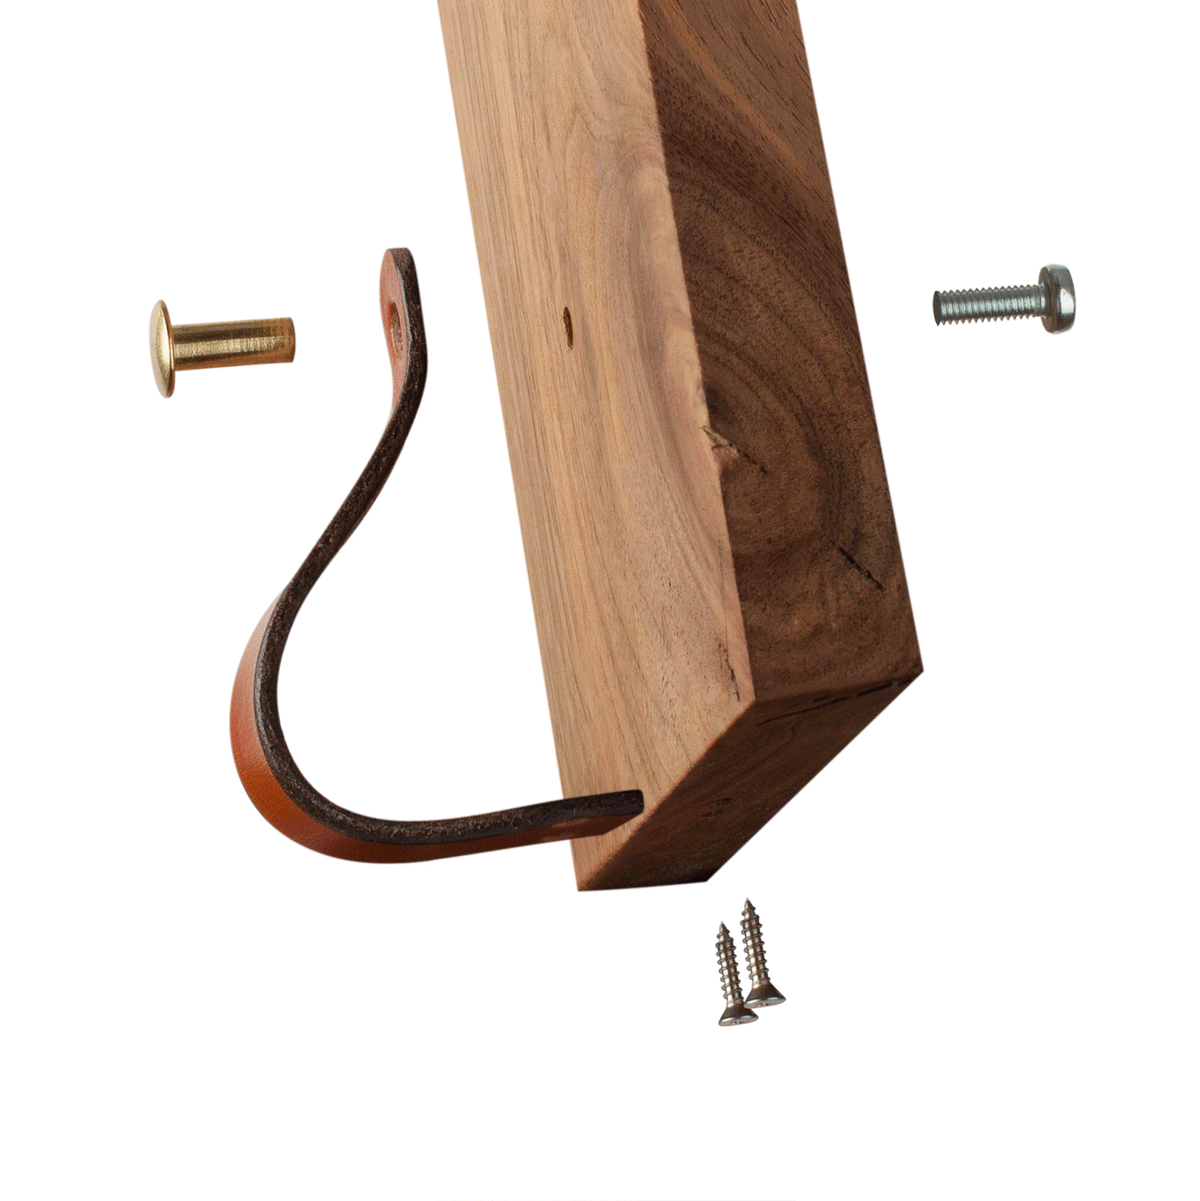 White background image showing how to install the Lovejoy leather handle with hardware: a surfaceness Chicago screw in front goes through a hole in the cabinet door and secured with threaded screws.